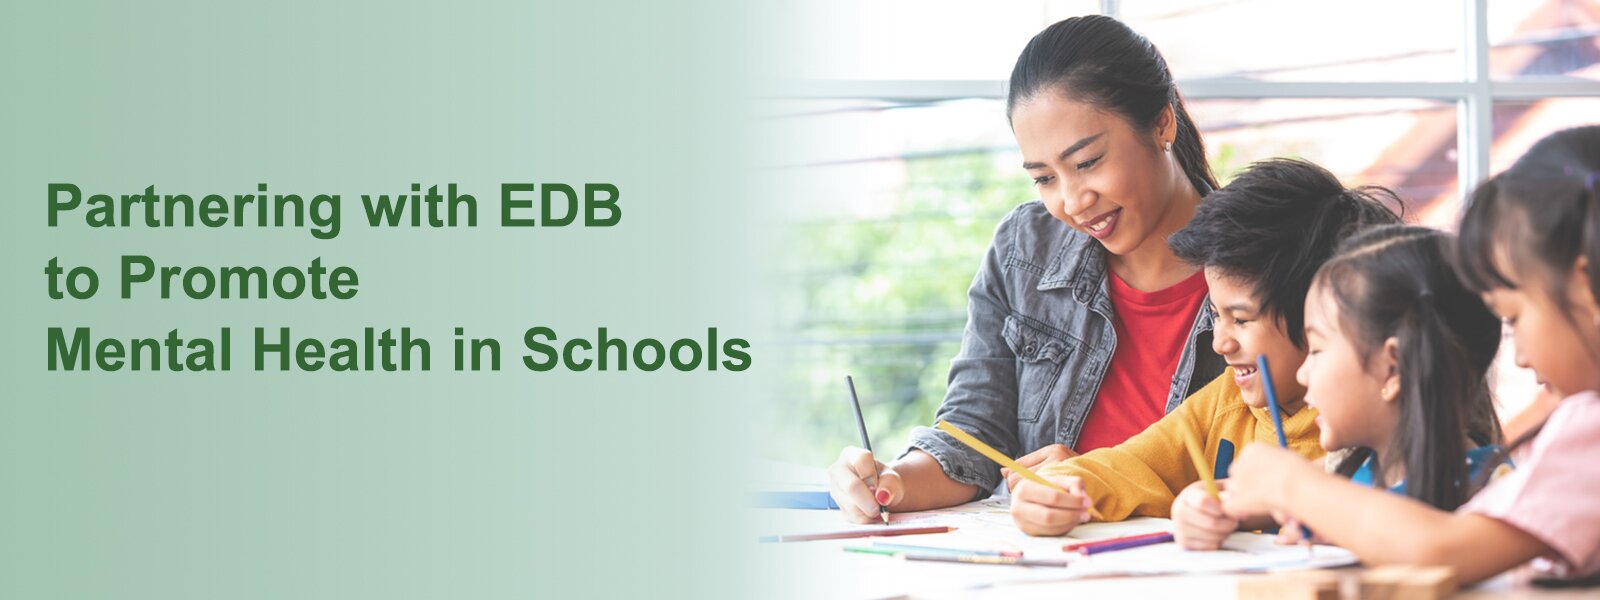 Partnering with EDB to Promote Mental Health in Schools